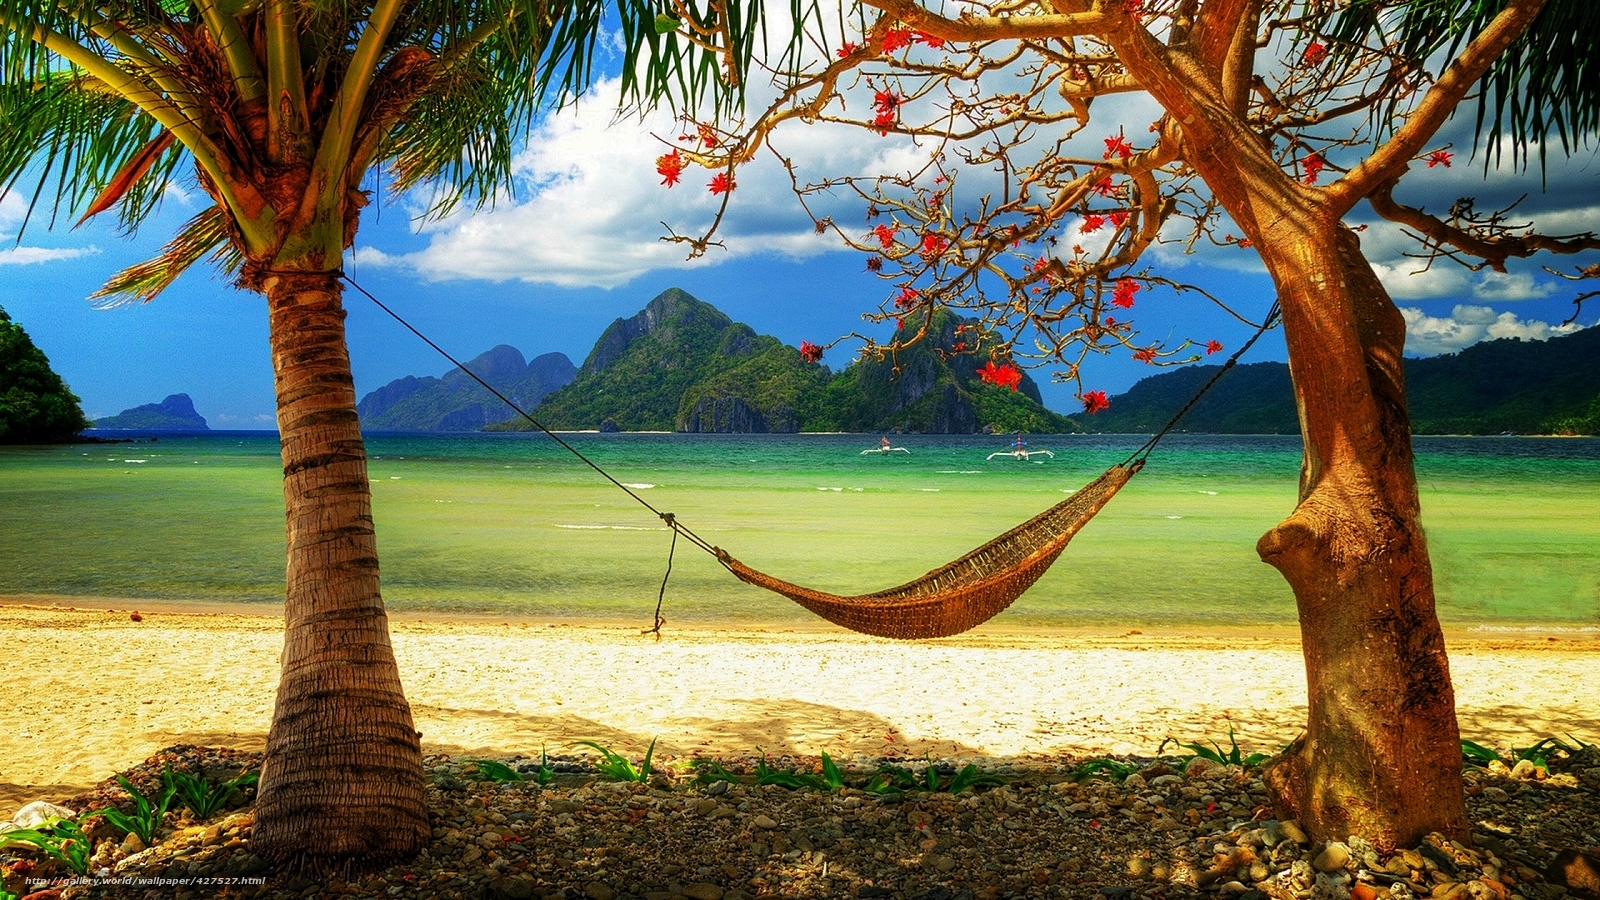 Caribbean Hammock Wallpaper Images Pictures   Becuo